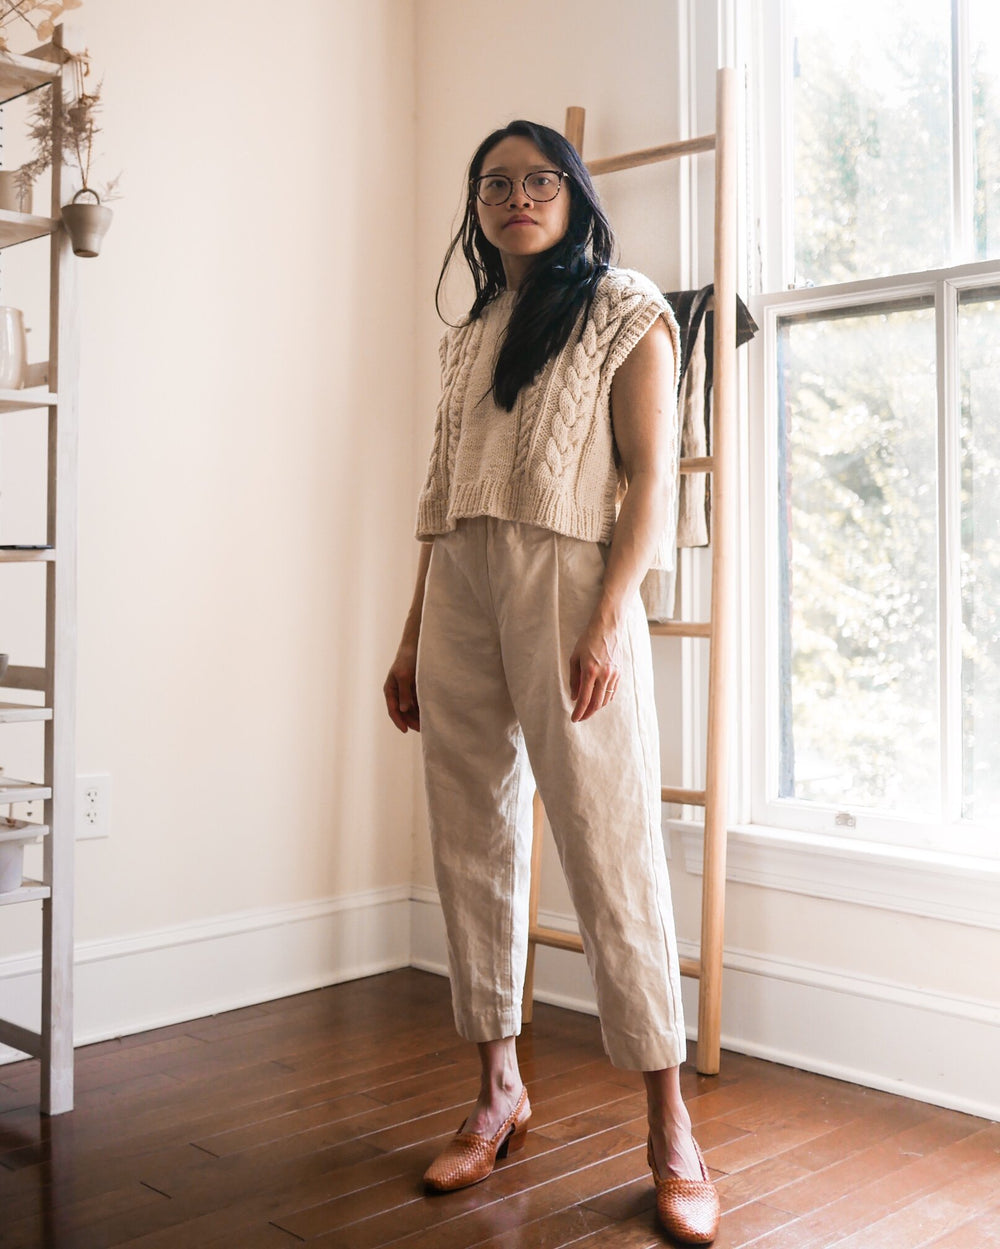 Woman wearing the Bisque Trousers sewing pattern from Vivian Shao Chen on The Fold Line. A trousers pattern made in cotton or linen fabric, featuring a high elasticated waist, slightly dropped crotch, deep front pleats, slant pockets, tapered leg, and cro